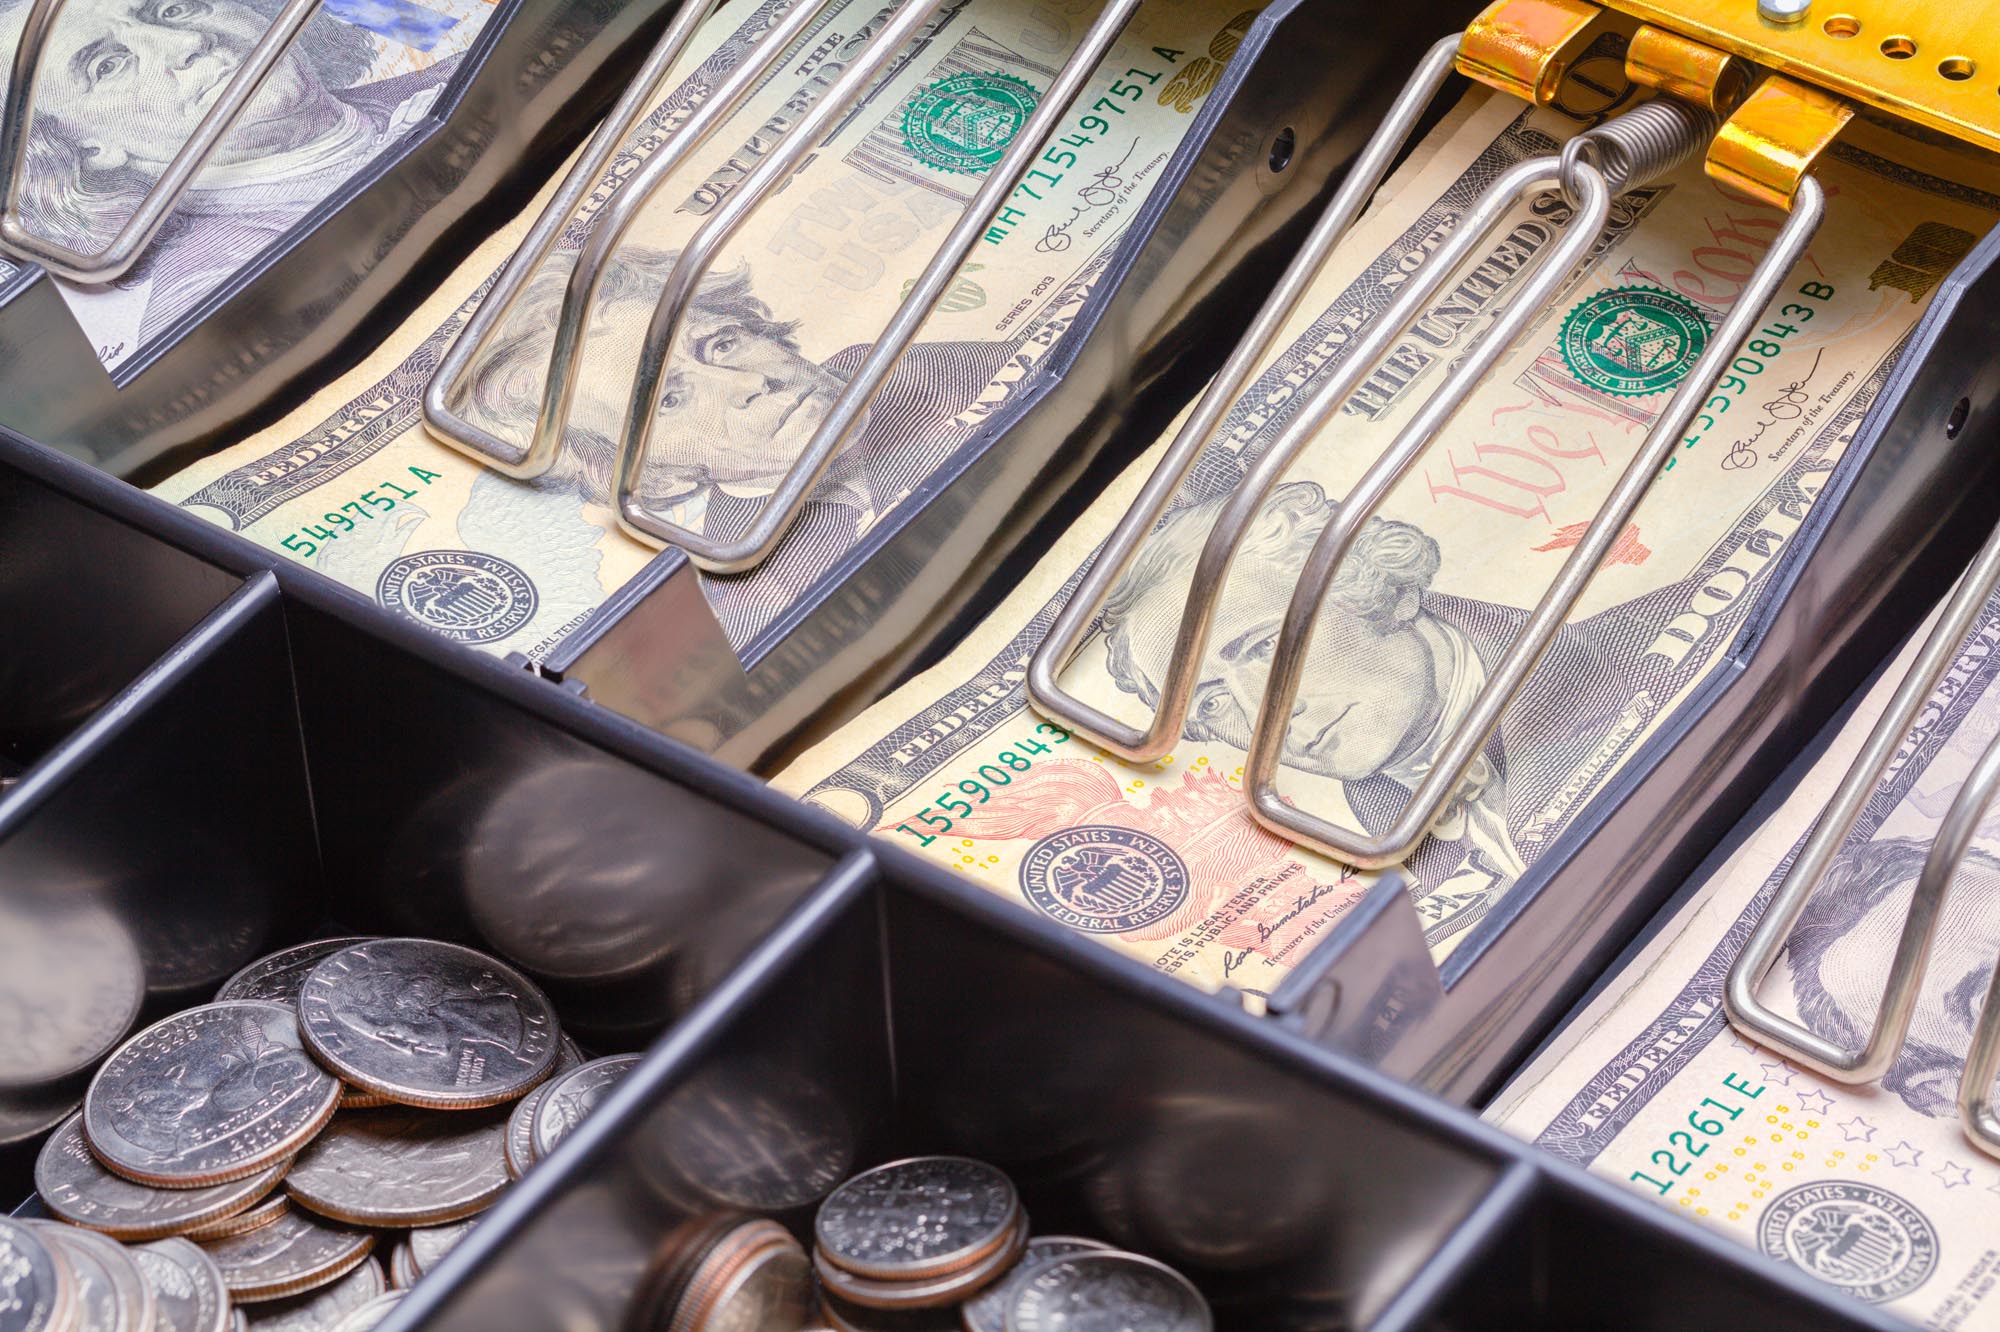 Cash handling best practices for convenience stores